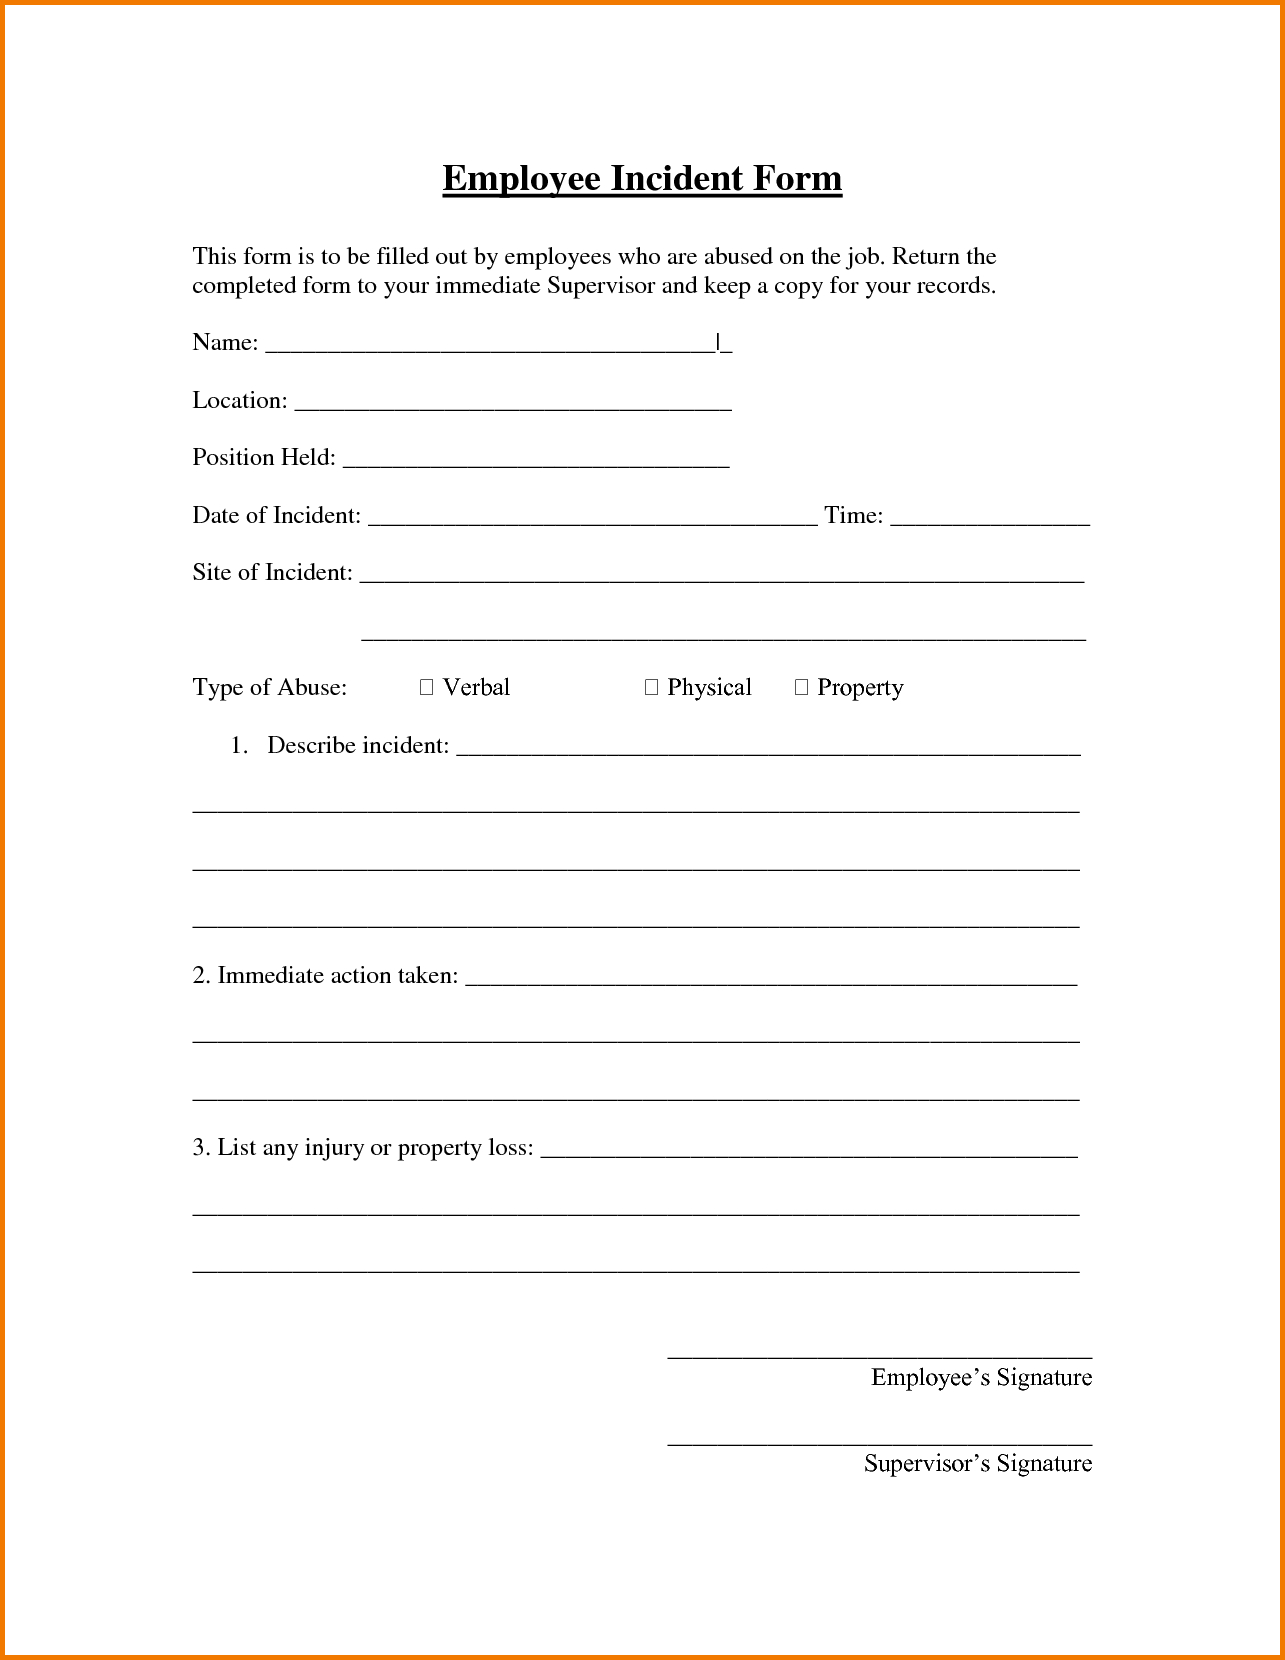 Report: Incident Report Template - Free Printable Incident Report Form